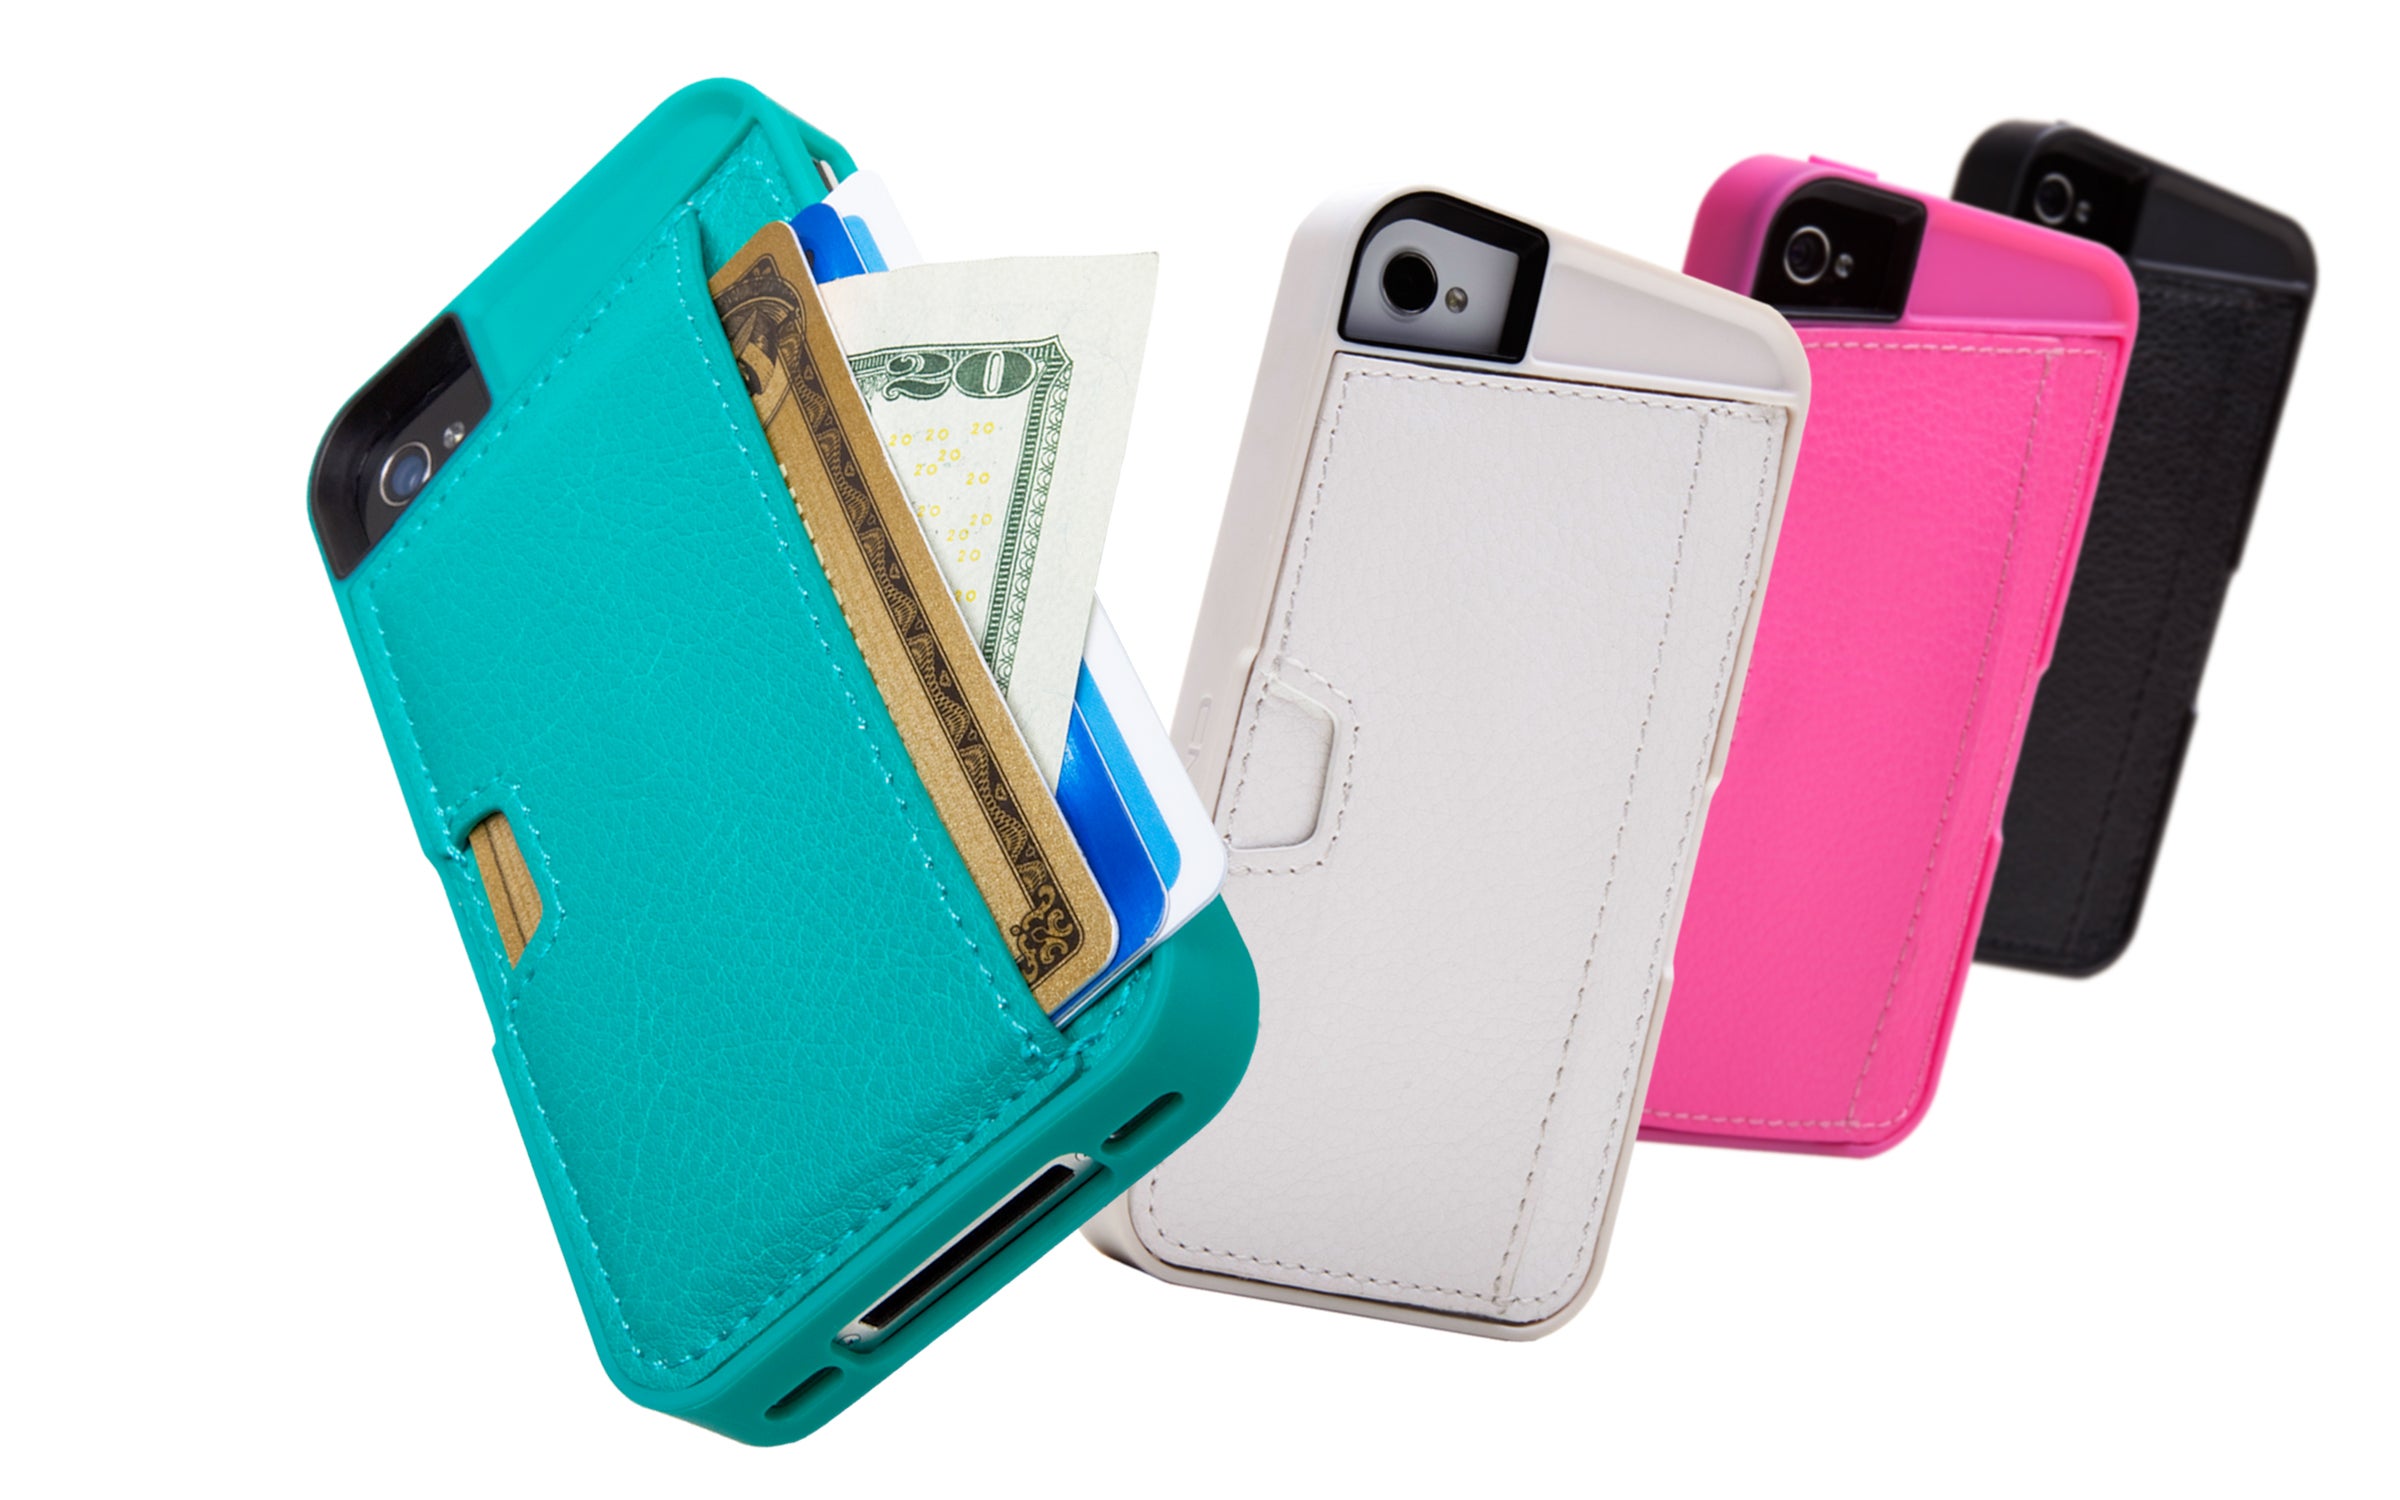 CM4&#039;s case for the iPhone 4/4S doubles as a wallet - lessens the bulk in your pockets